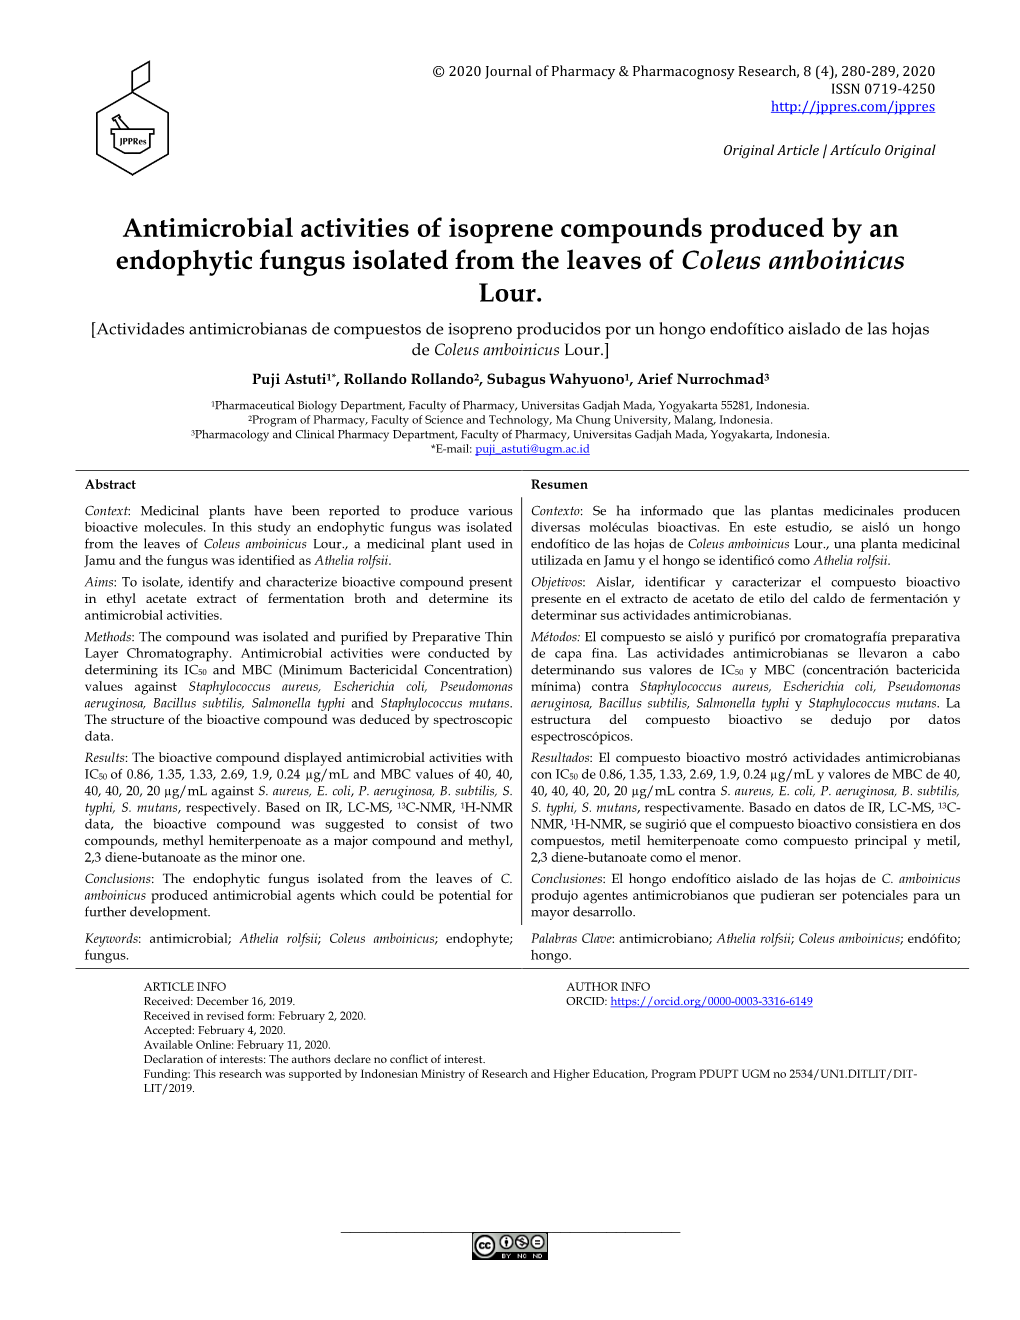 Antimicrobial Activities of Isoprene Compounds Produced by an Endophytic Fungus Isolated from the Leaves of Coleus Amboinicus Lour